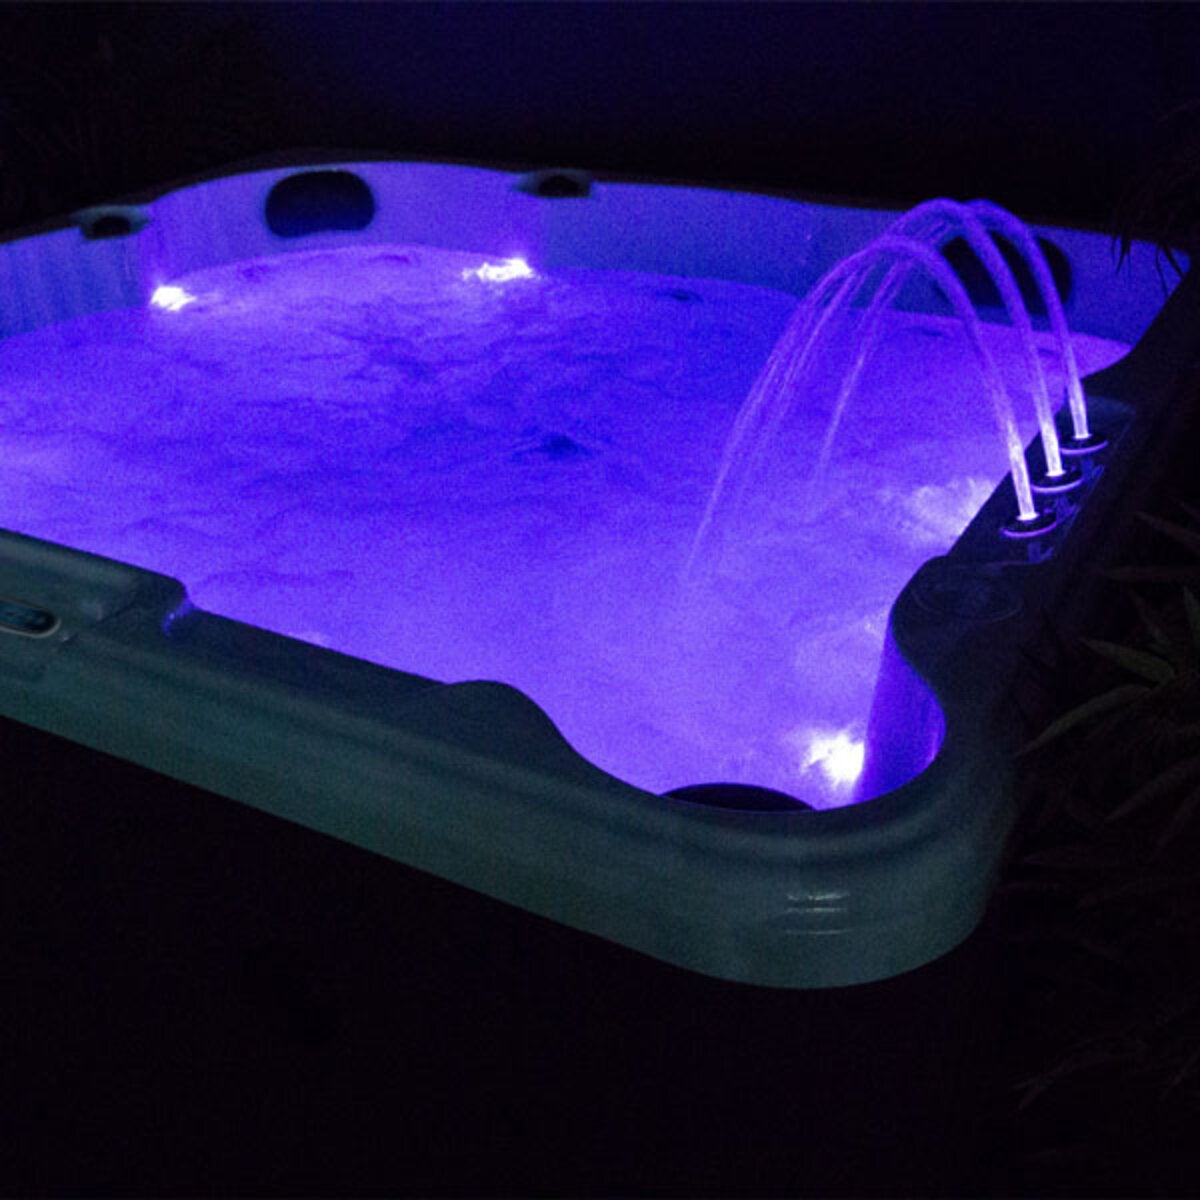 Hot Tub Master Angel Stream II 36-Jet 5 Person Hot Tub - Delivered and Installed